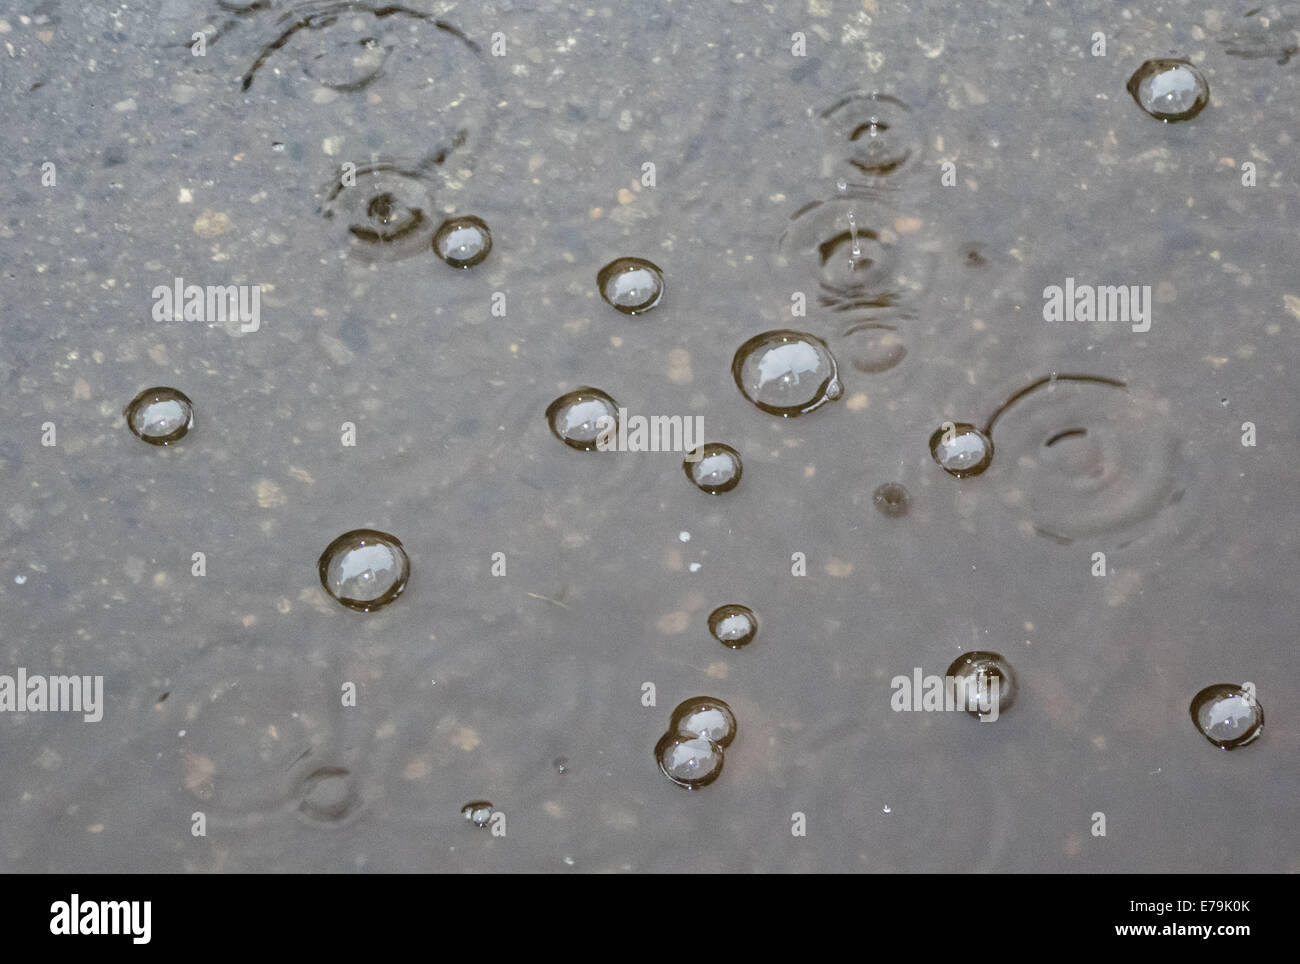 rain with air bubbles on puddle Stock Photo